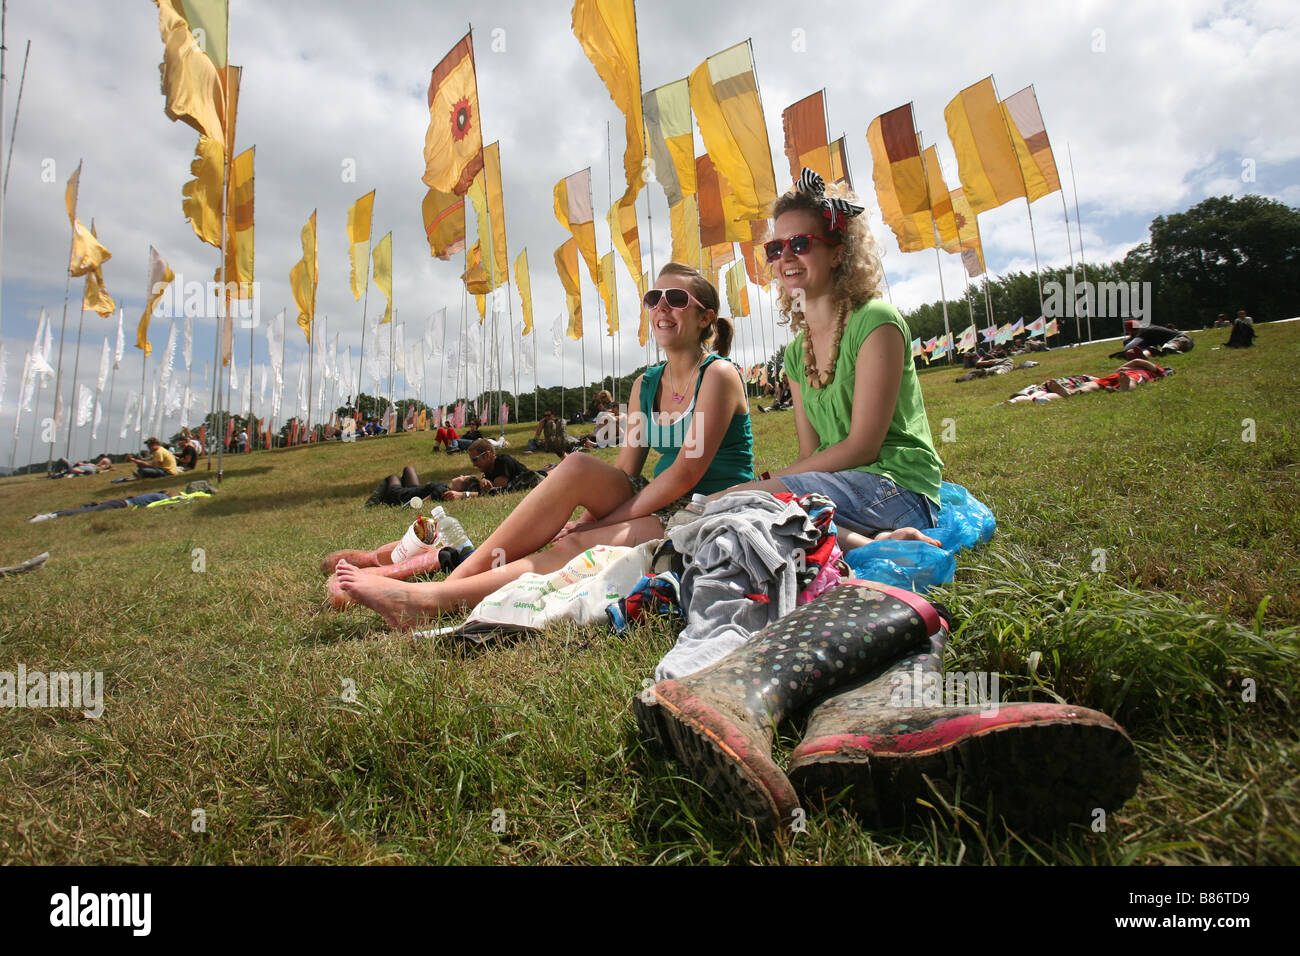 A pair of girls enjoy the sunshine sat among flags at the Glastonbury Festival in Pilton, Somerset in the UK. Stock Photo